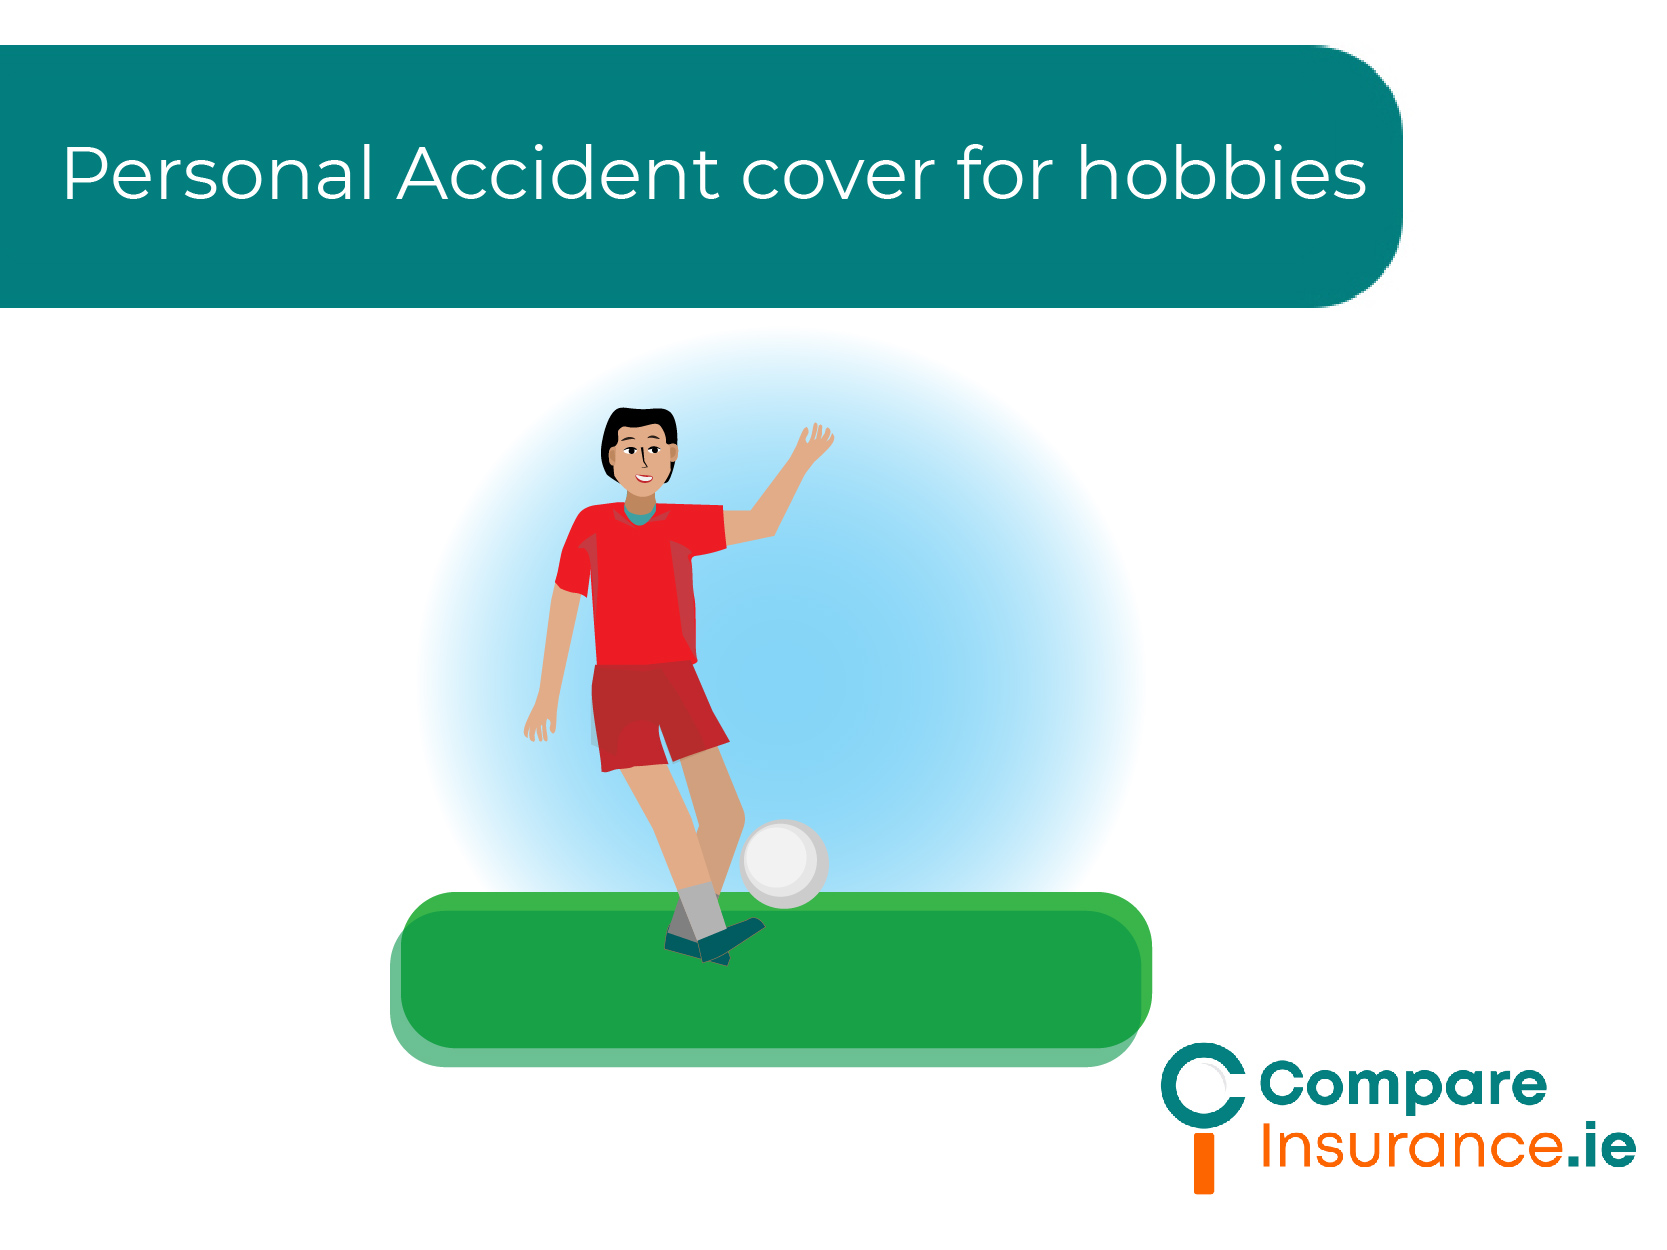 Personal Accident cover for hobbies